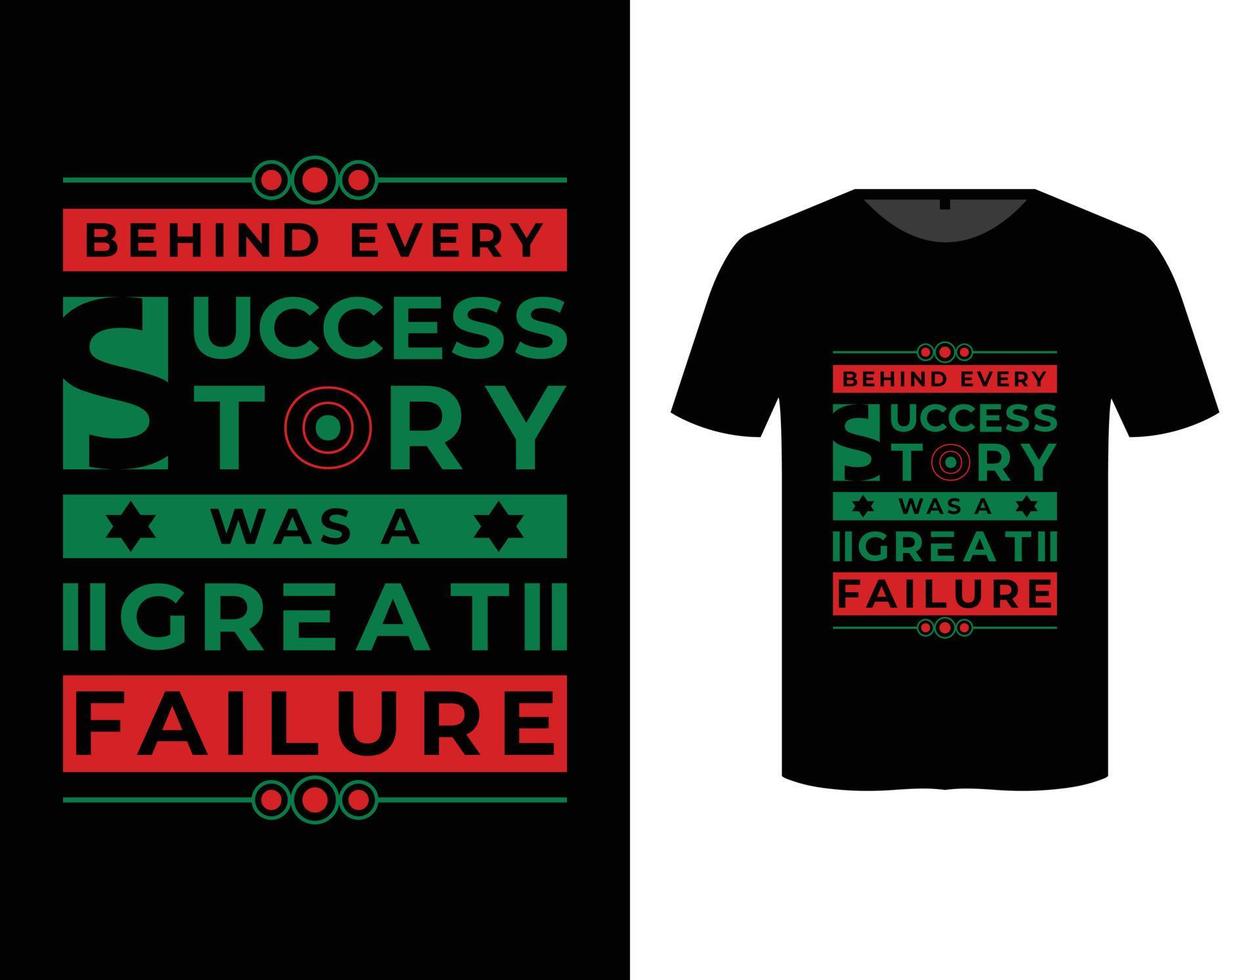 Behind every success story was a great failure inspirational quote modern typography t shirt design template vector